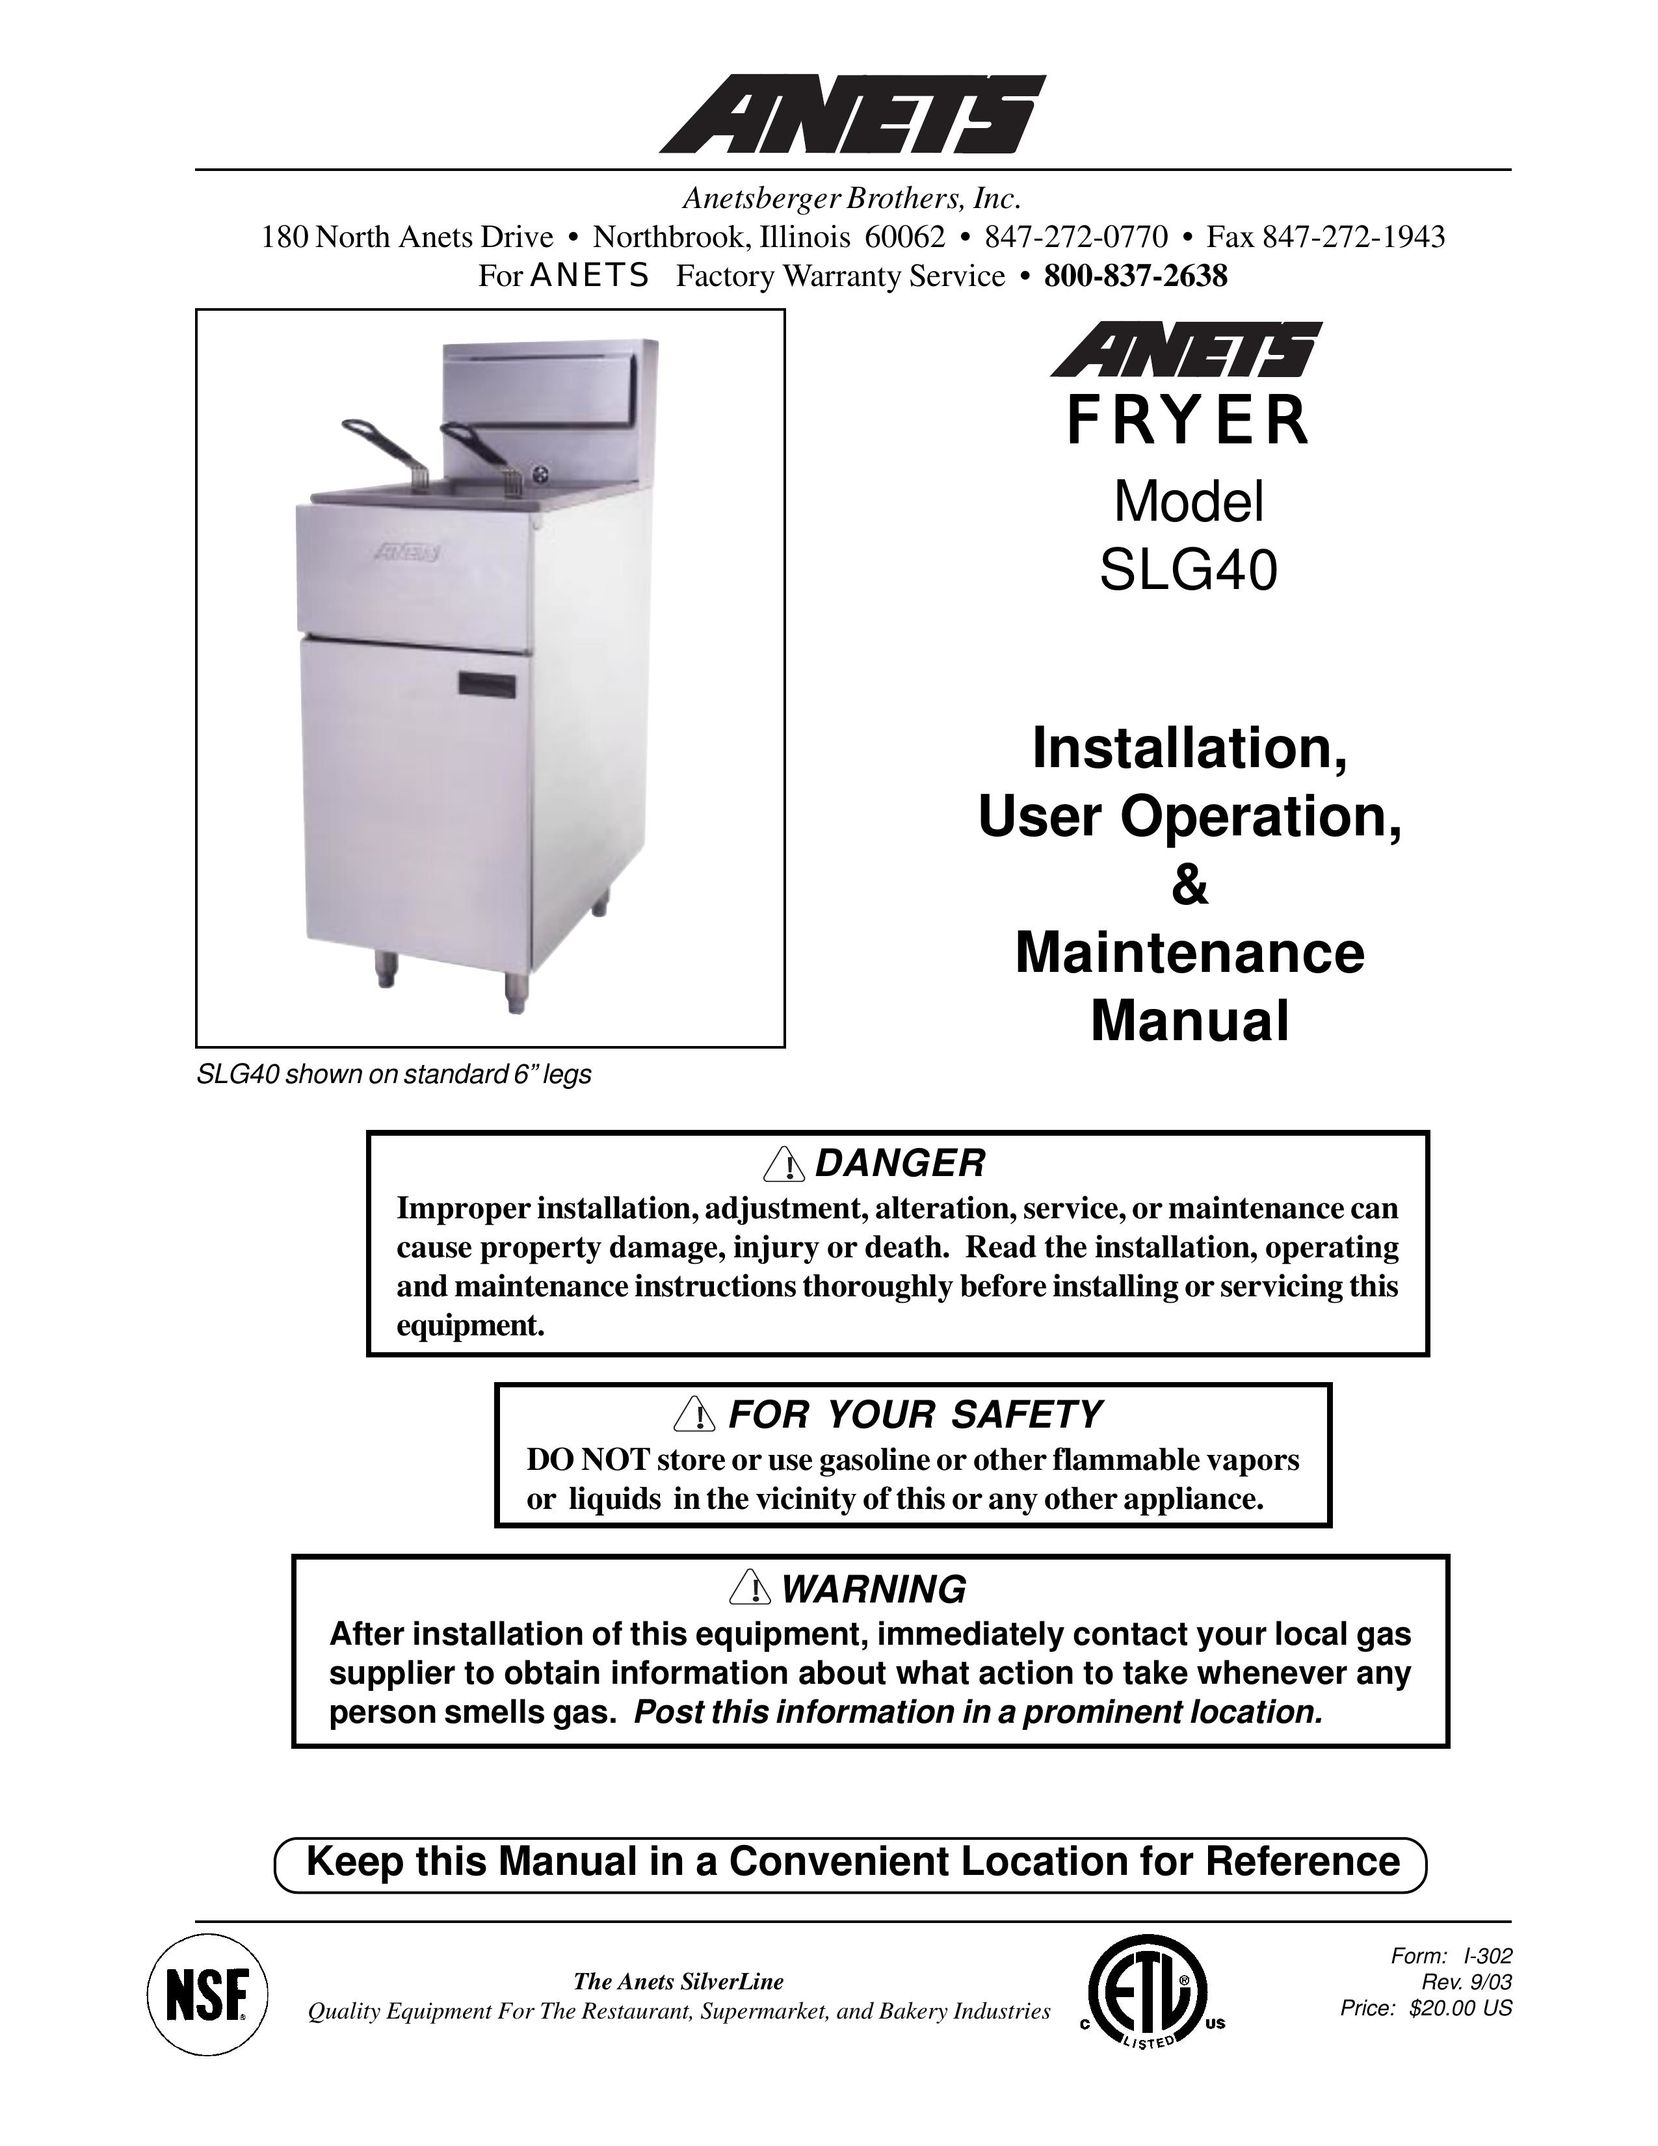 Anetsberger Brothers SLG40 Fryer User Manual